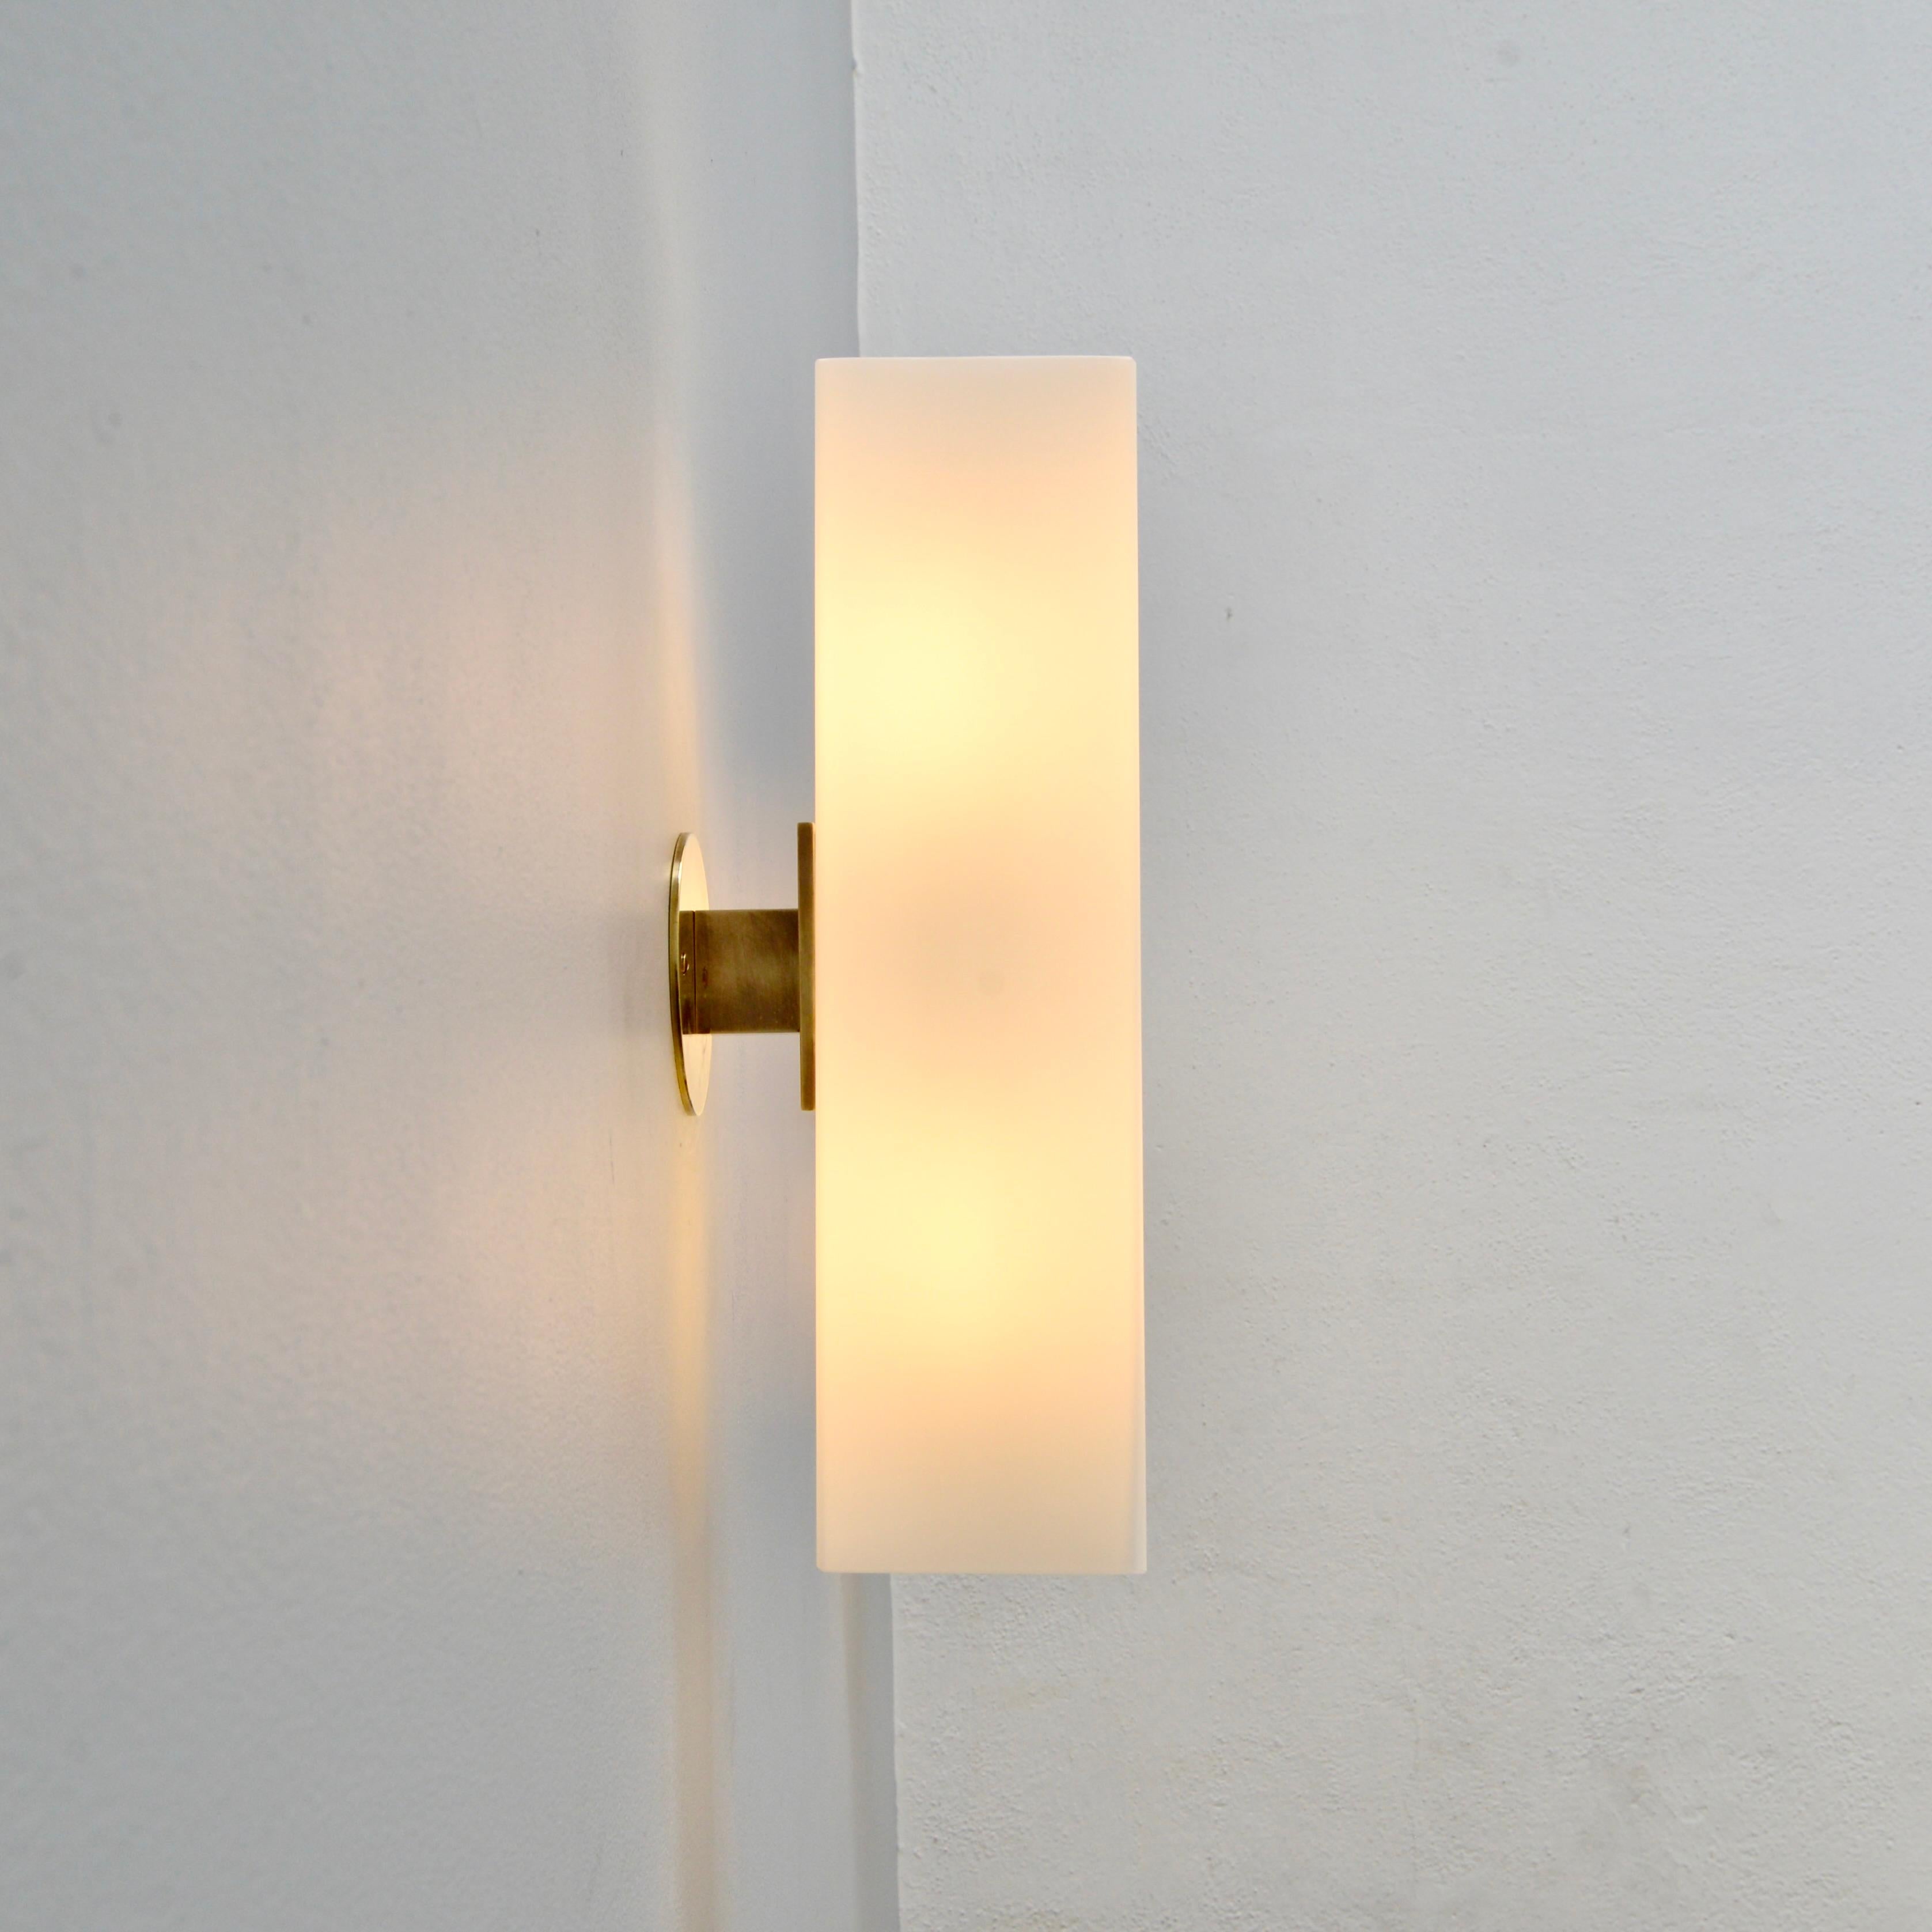 LUZQT NB Sconce by Lumfardo Luminaires In New Condition For Sale In Los Angeles, CA